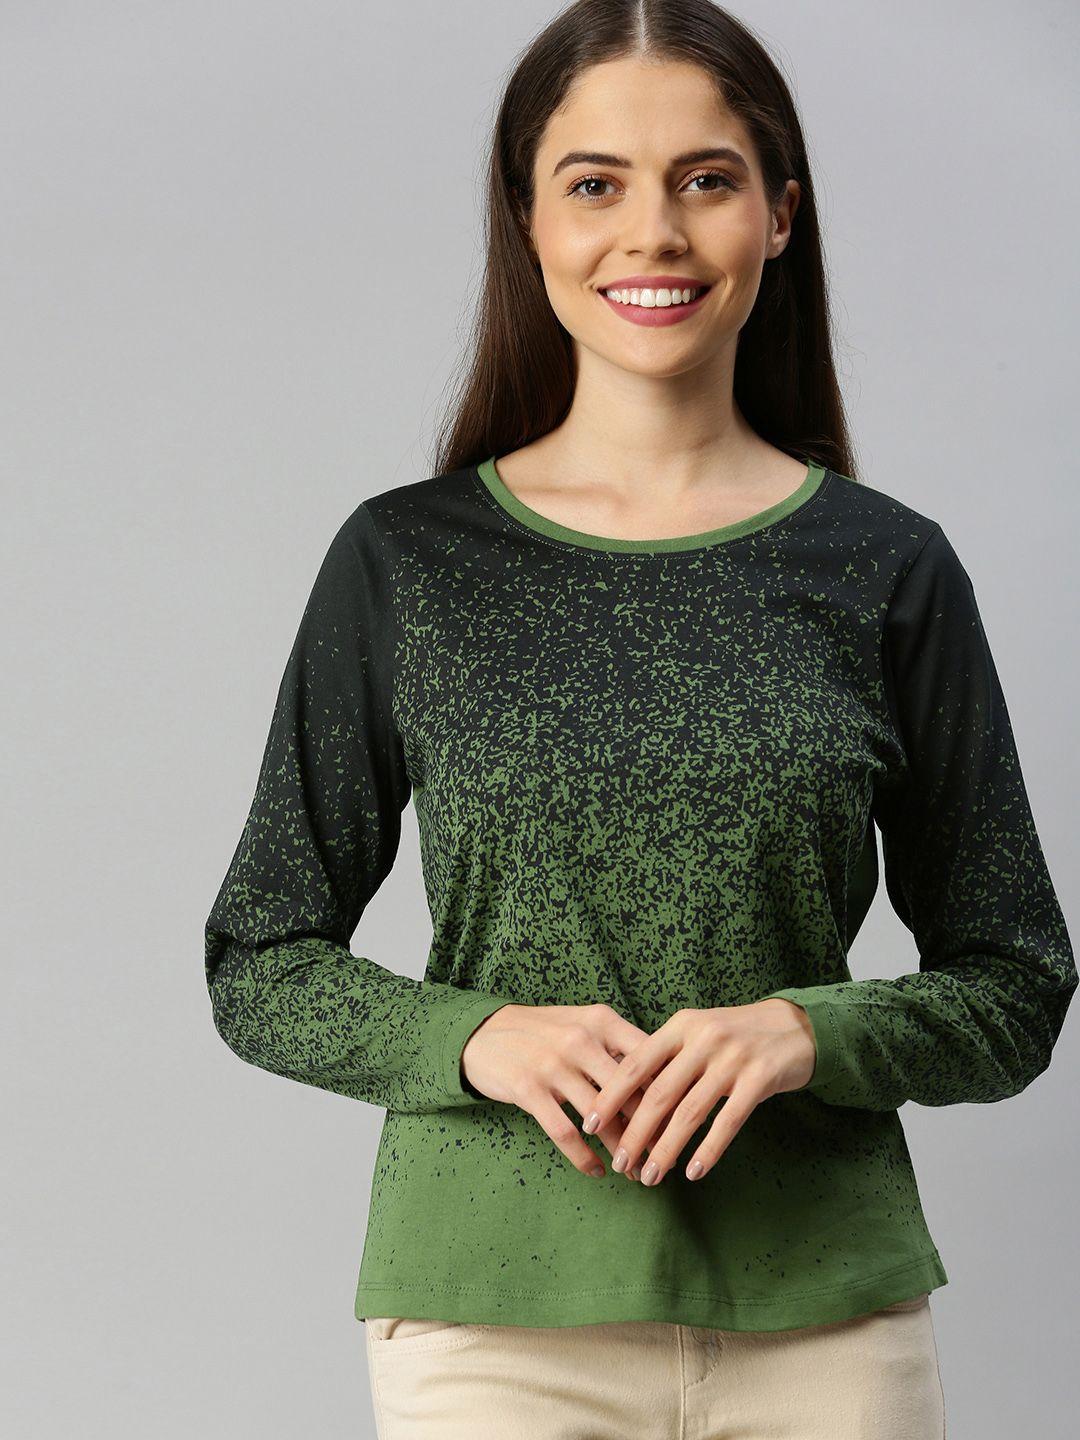 enviously-young-women-olive-green--black-printed-round-neck-pure-cotton-t-shirt